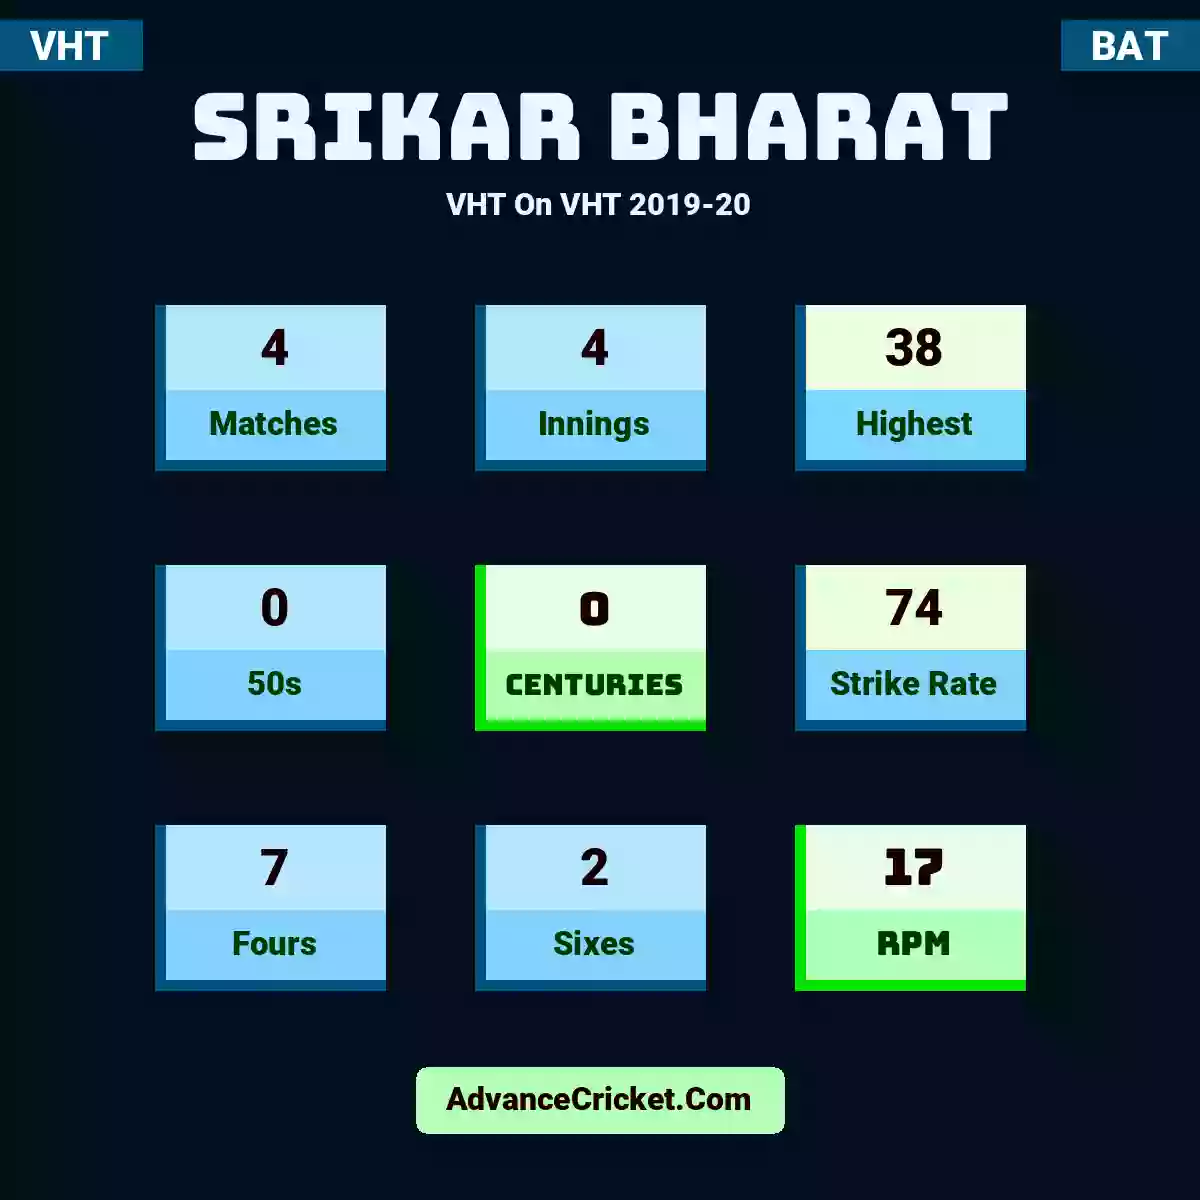 Srikar Bharat VHT  On VHT 2019-20, Srikar Bharat played 4 matches, scored 38 runs as highest, 0 half-centuries, and 0 centuries, with a strike rate of 74. S.Bharat hit 7 fours and 2 sixes, with an RPM of 17.